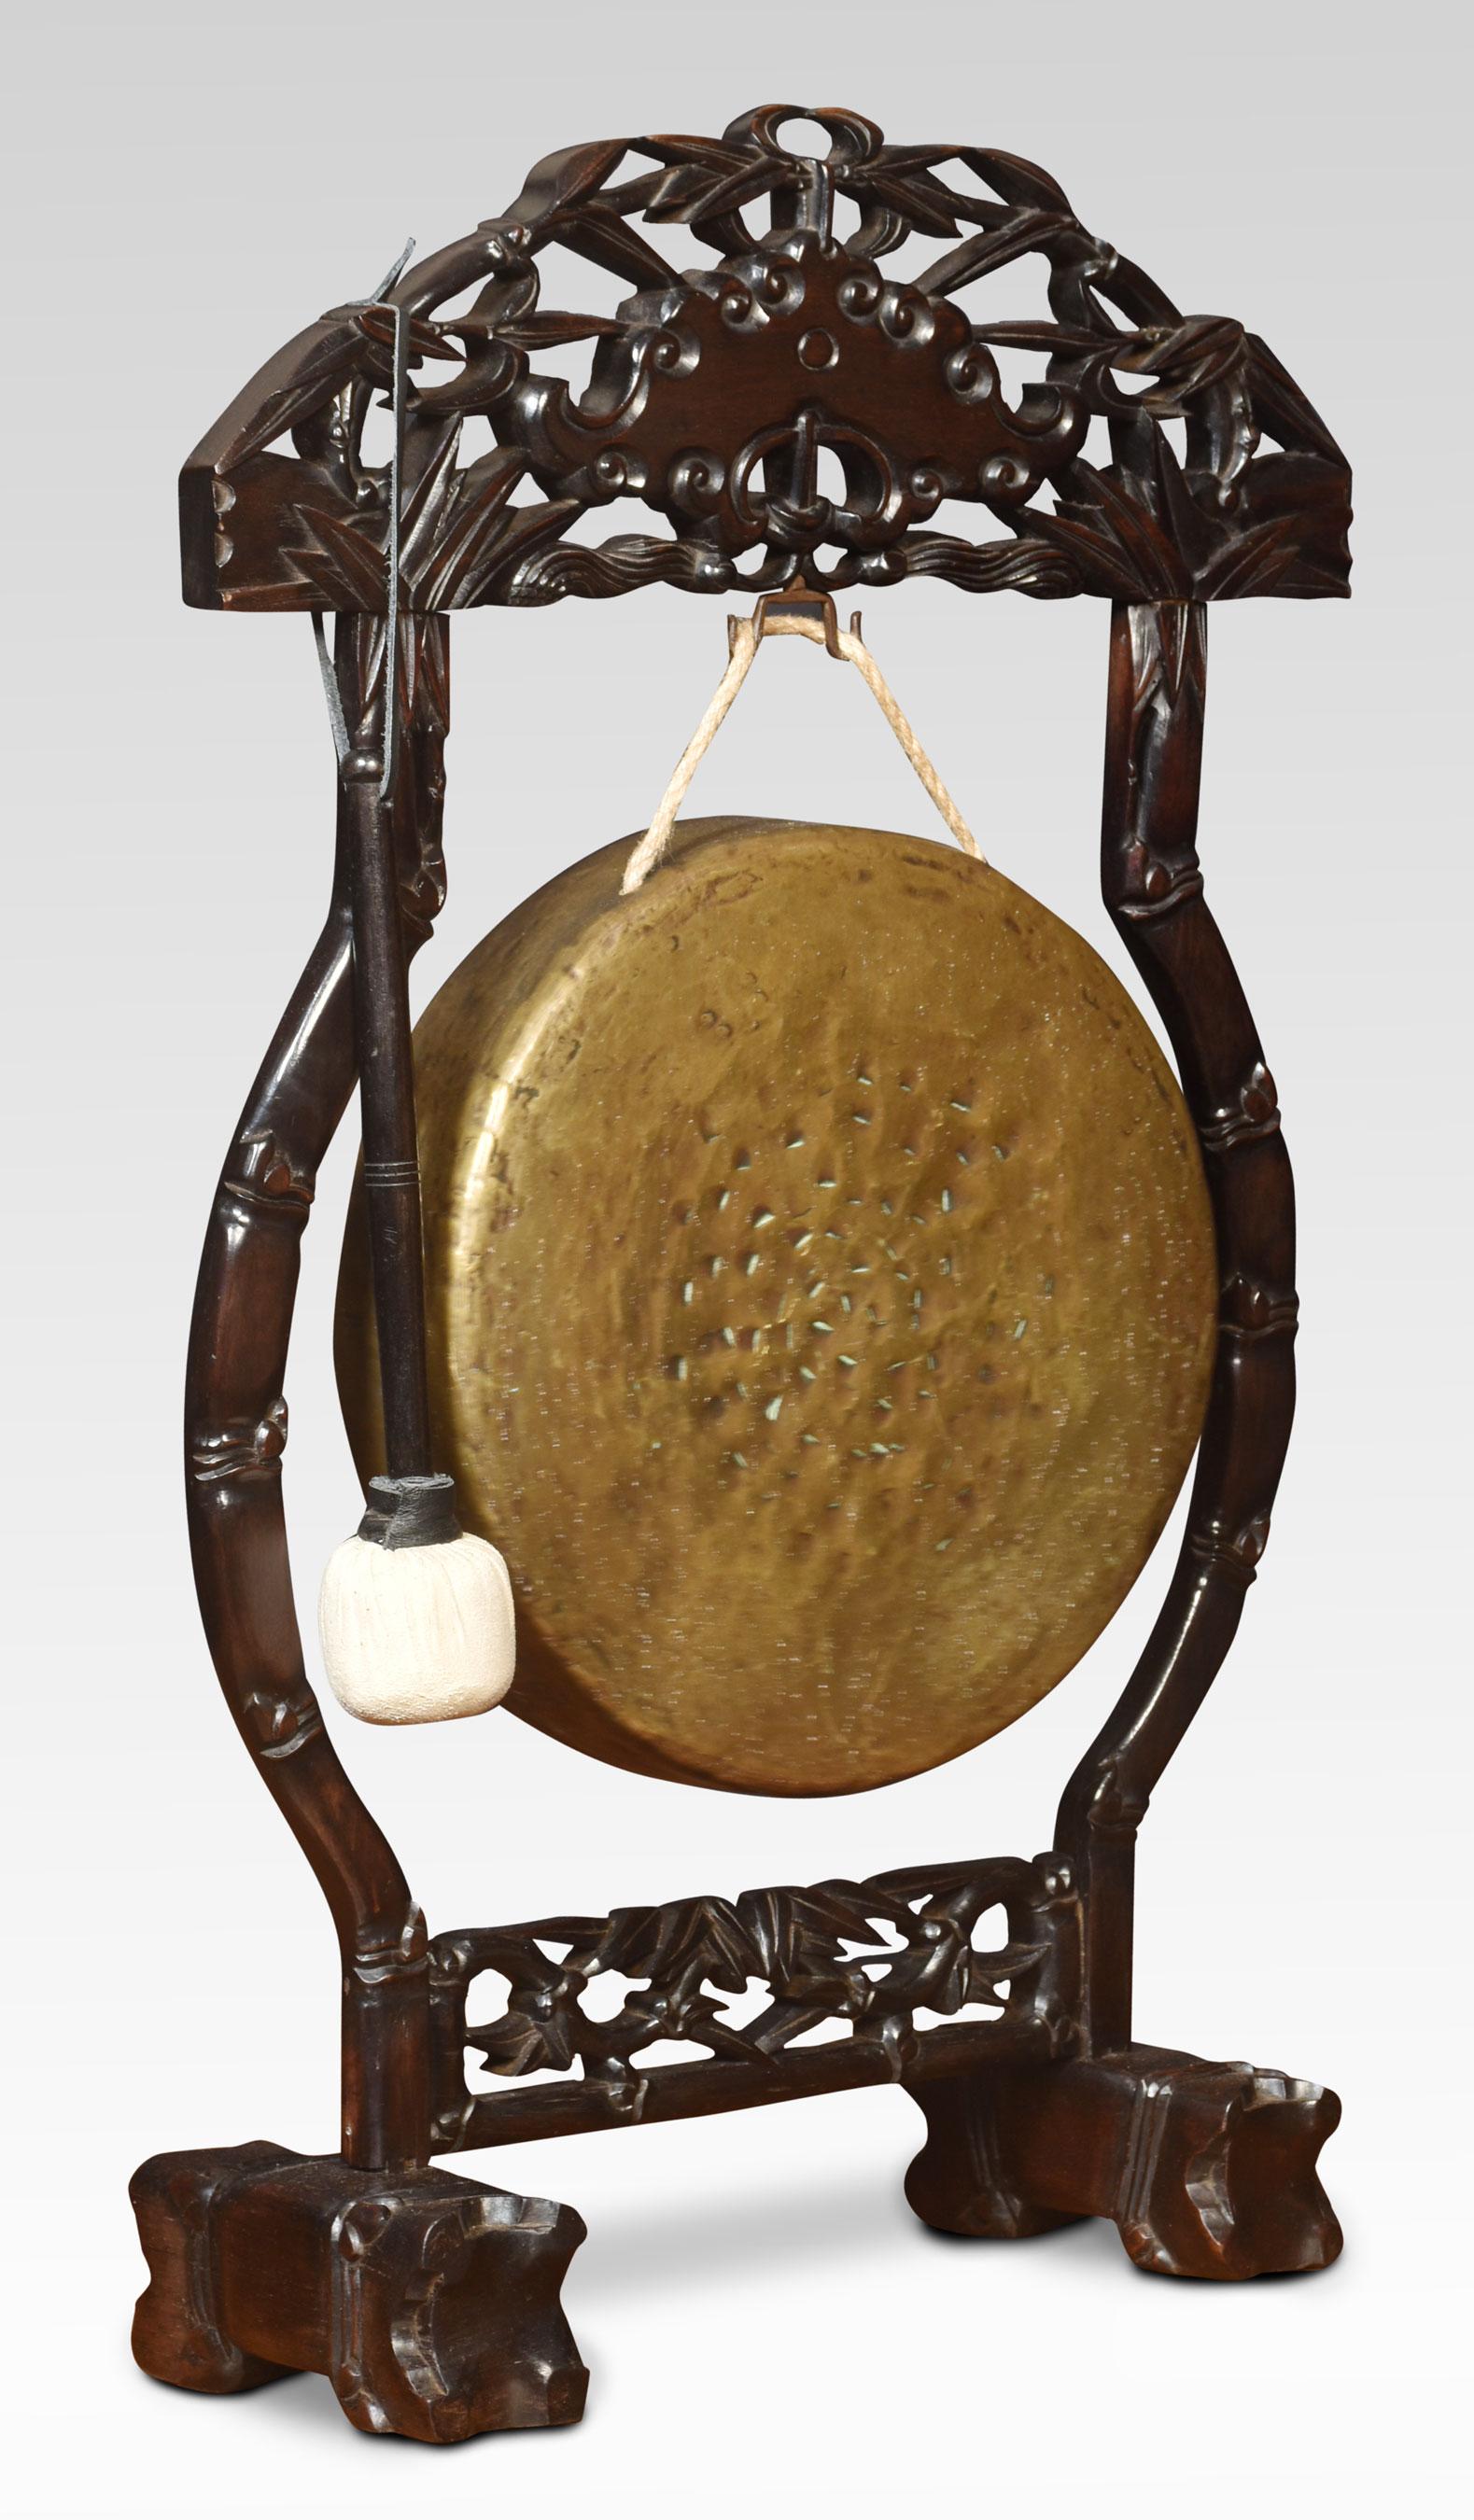 Chinese dinner gong, the profusely carved frame with pierced decoration, supporting the original brass gong and beater. All raised up on stylised block feet.
Dimensions
Height 31 Inches
Length 19.5 Inches
Width 7.5 Inches